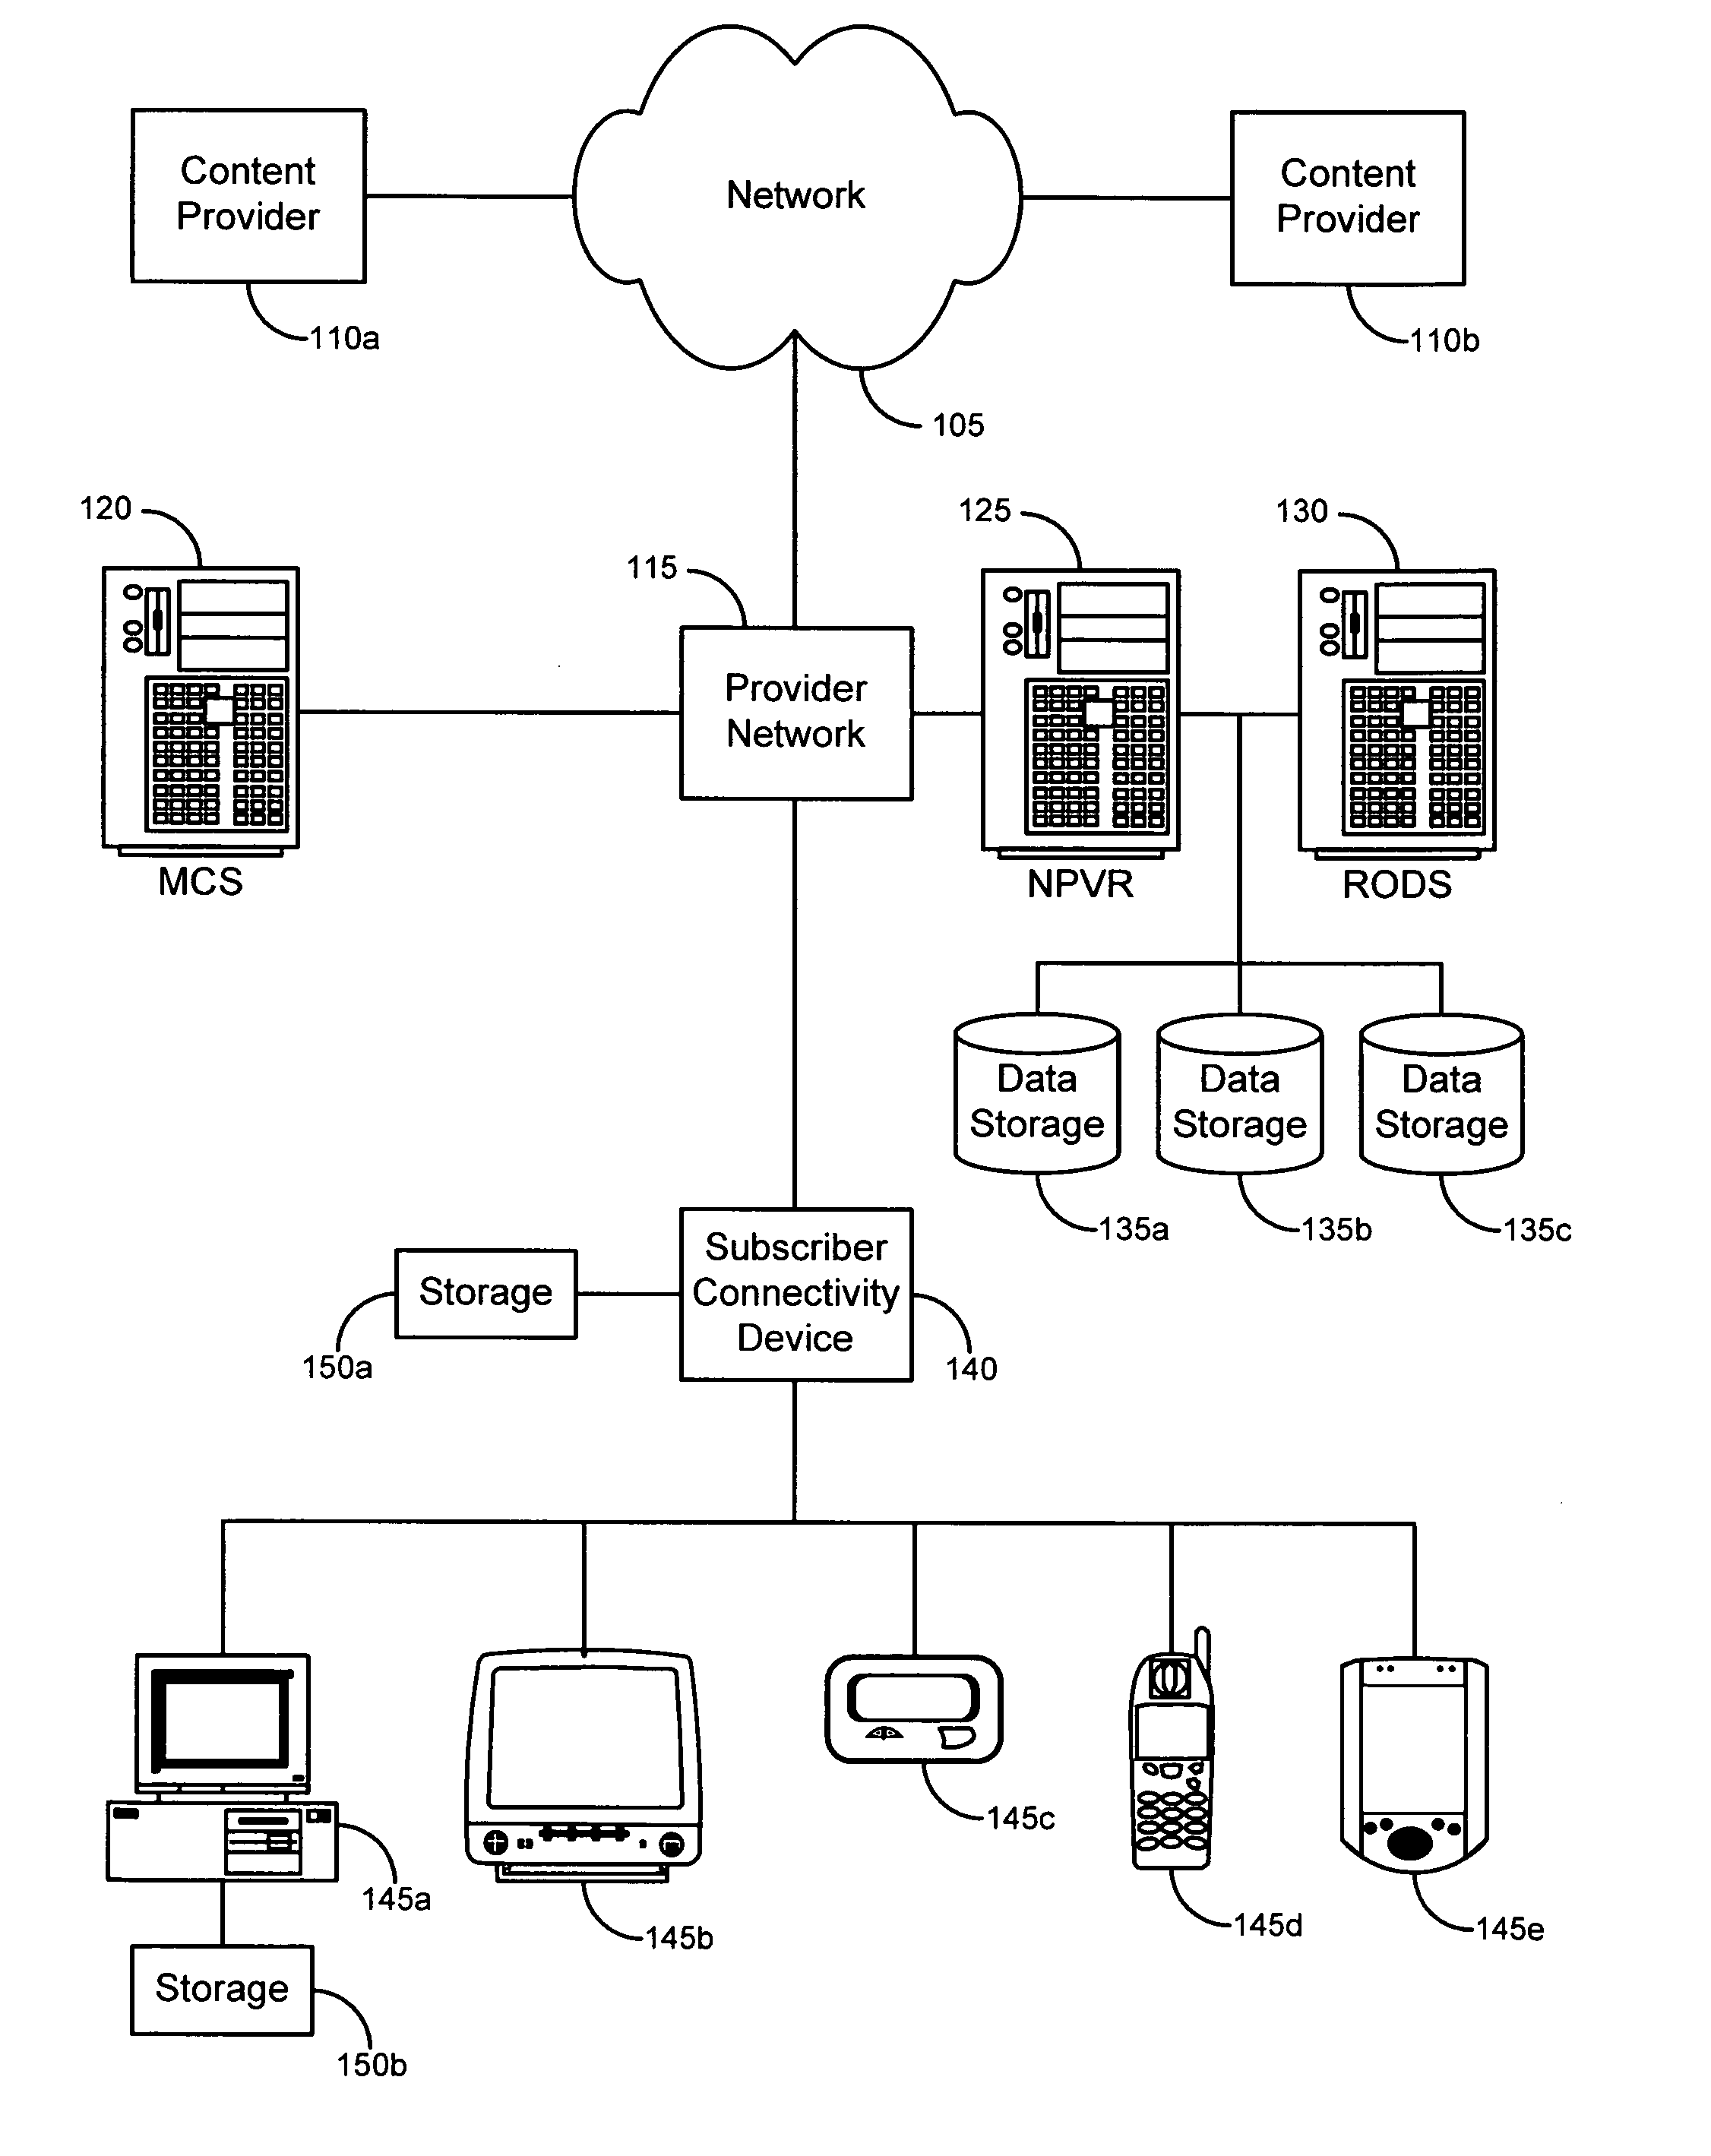 Networked PVR system